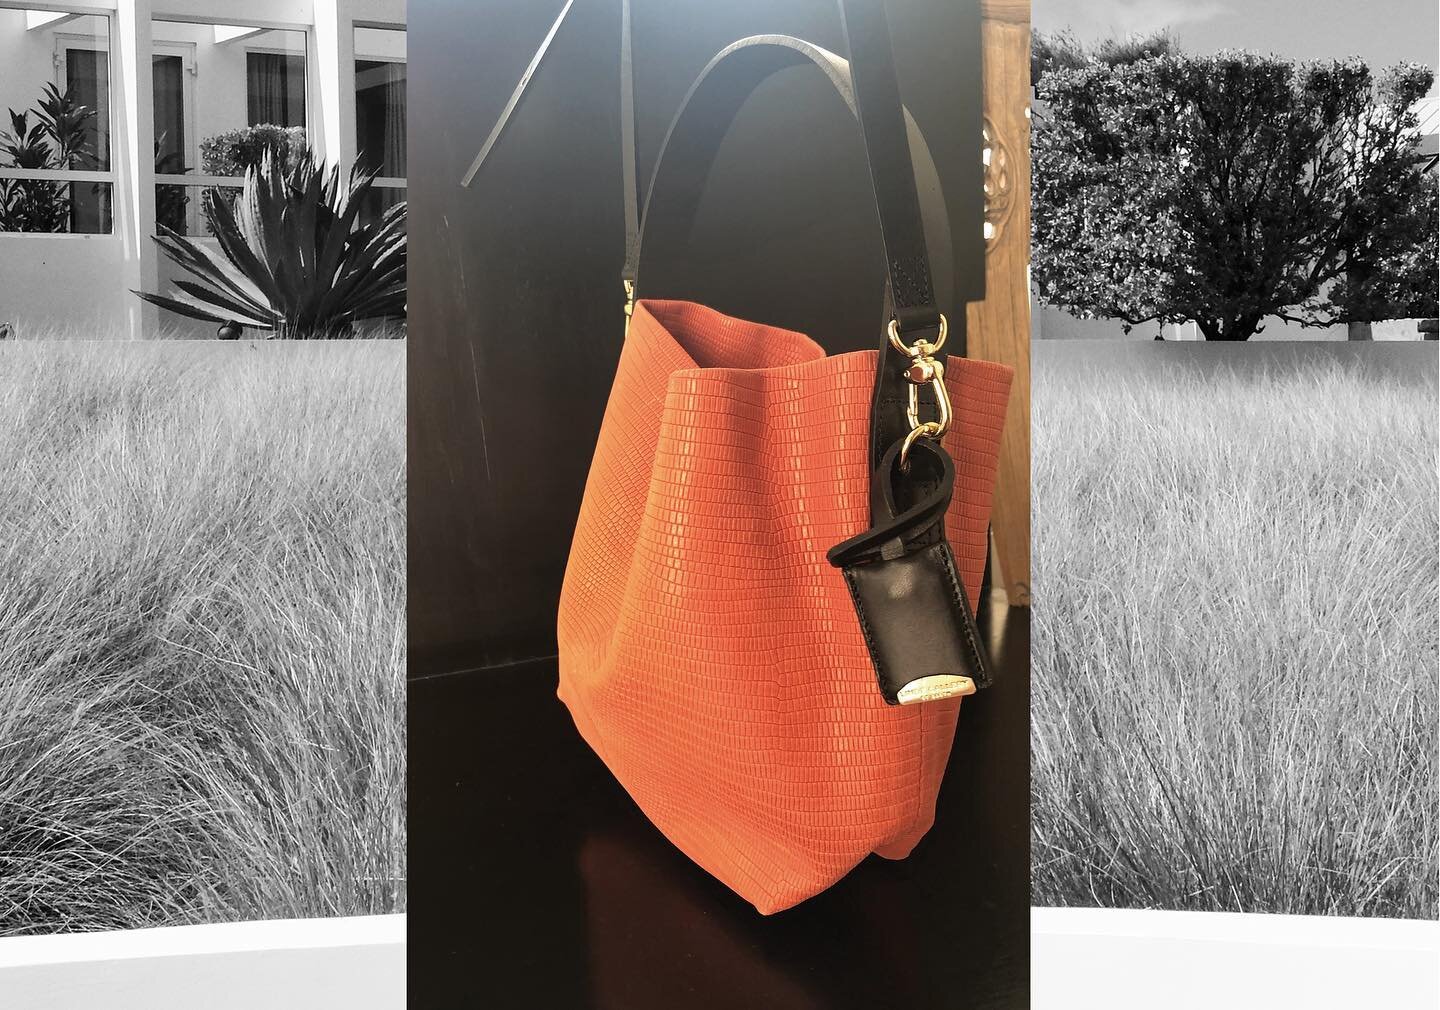 Lezard S - Lezard, Calf embossed - Coral
.
.
.
#summer2020🌴 #stbarth #timeless #pieces #madeinfrance